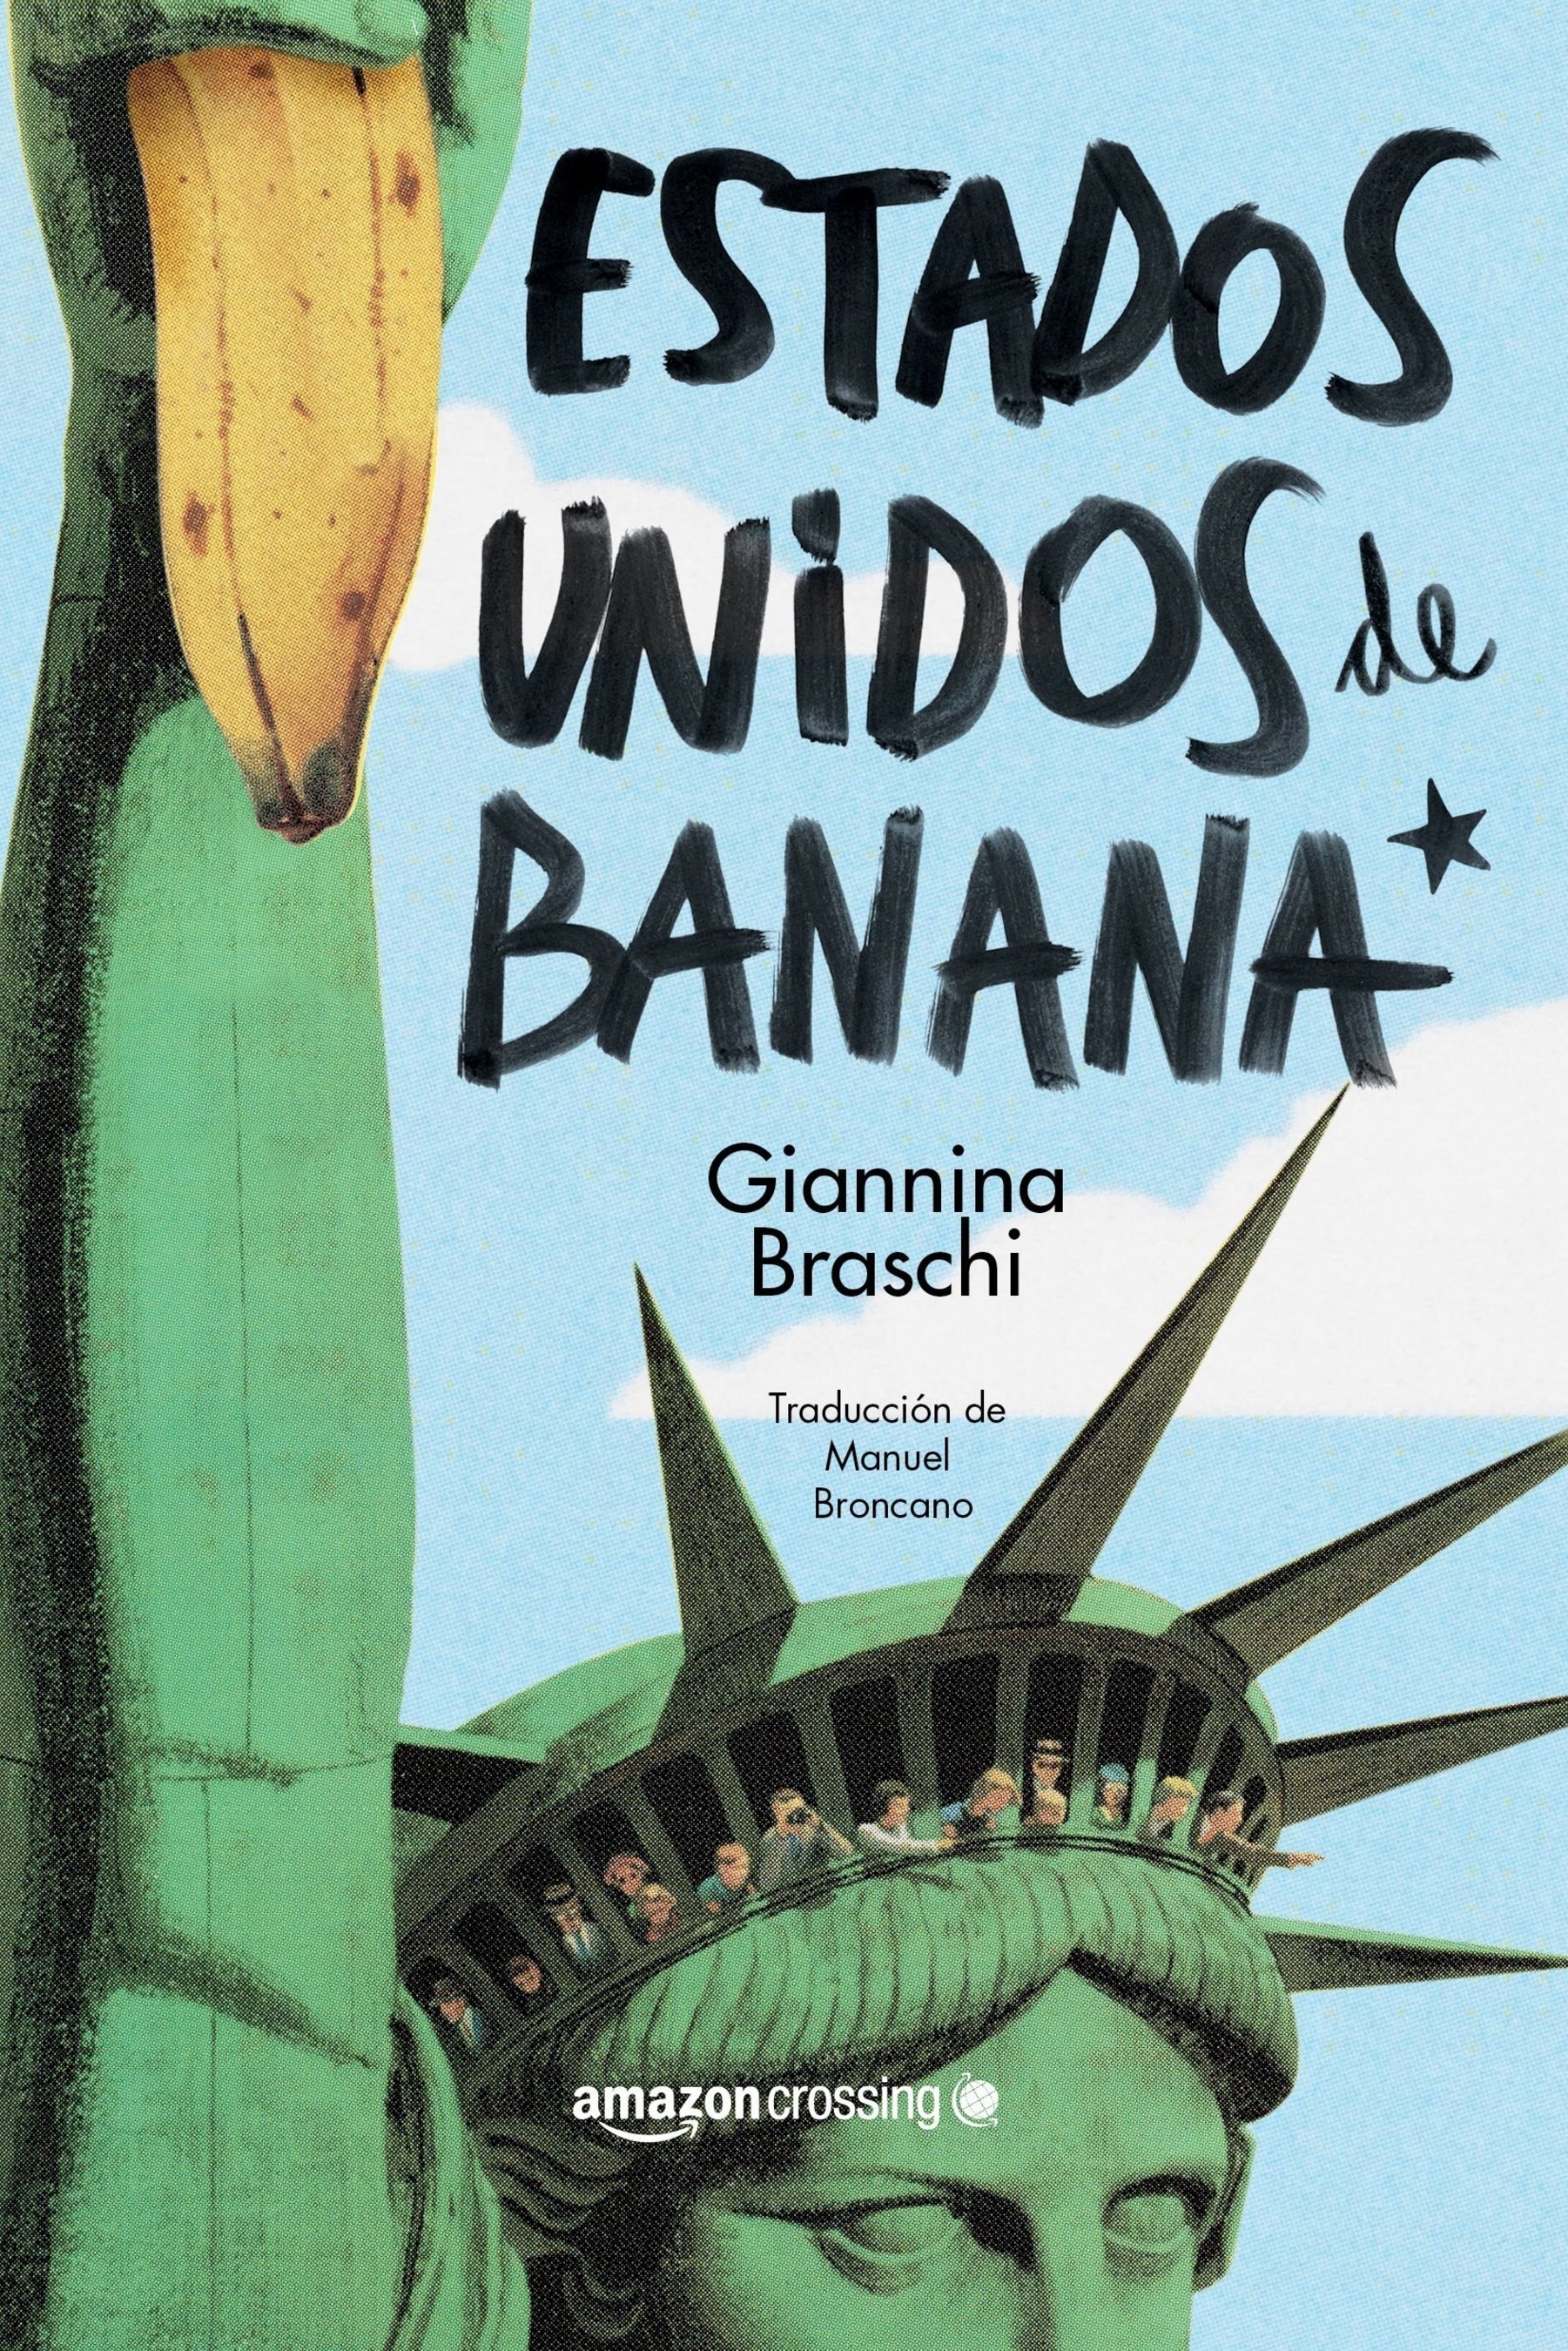 A Puerto Rican debt crisis is a catalyst for the disintegration of the American empire in United States of Banana.  The postcolonial dramatic novel by Puerto Rican author Giannina Braschi depicts the secession of American states and territories, starting with Puerto Rico's declaration of independence. The works is now available in Spanish translation by Manolo Broncano through AmazonCrossing en Espanol.